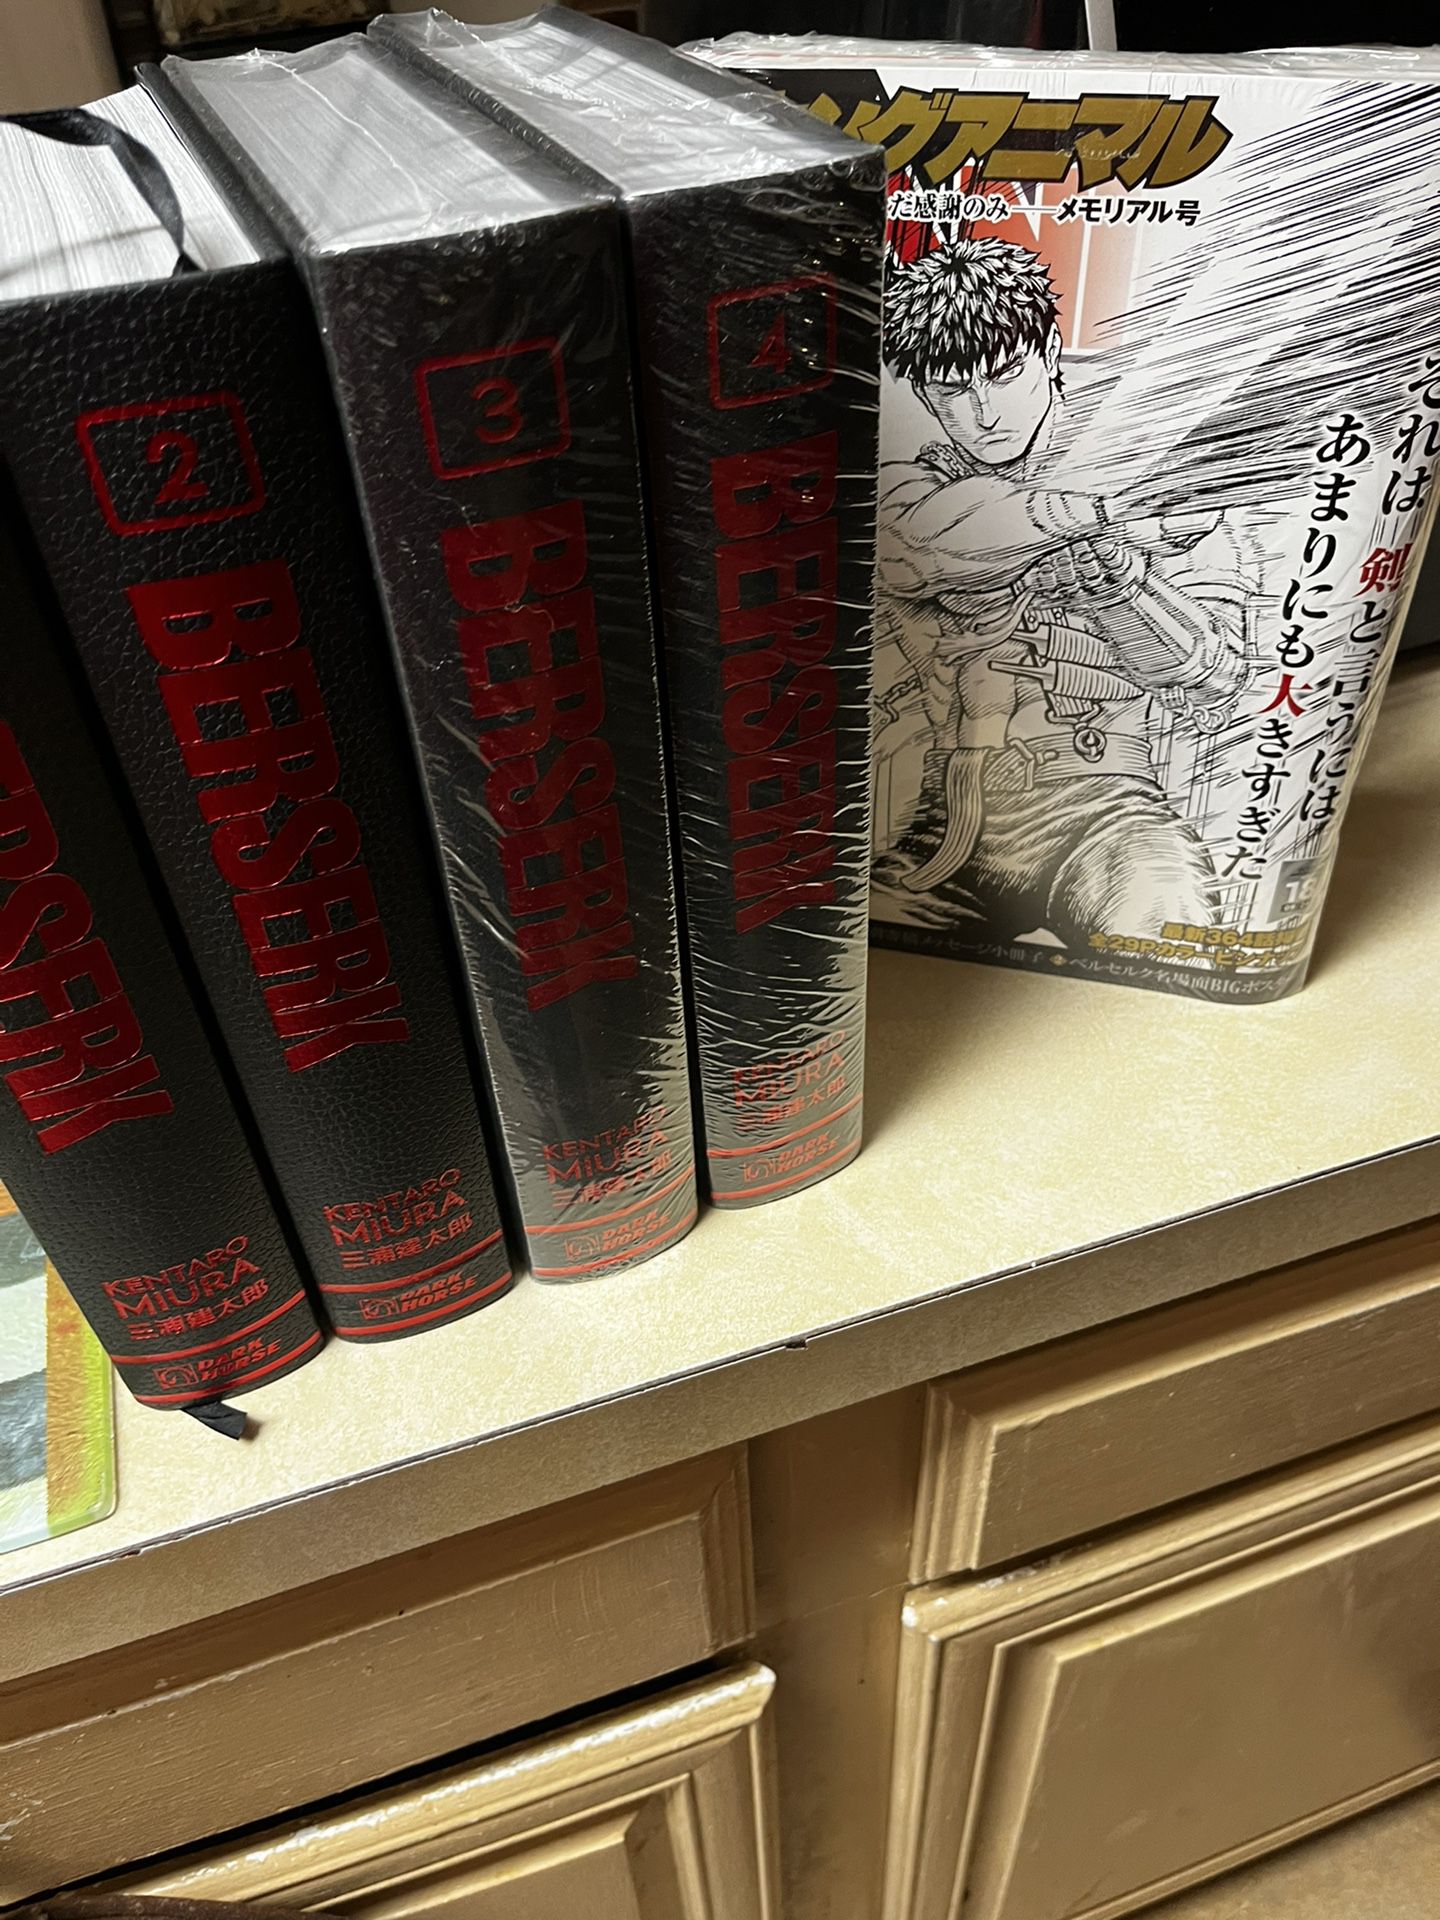 Berserk Deluxe 1,2+ Young Animal Magazine for Sale in Dallas, TX - OfferUp